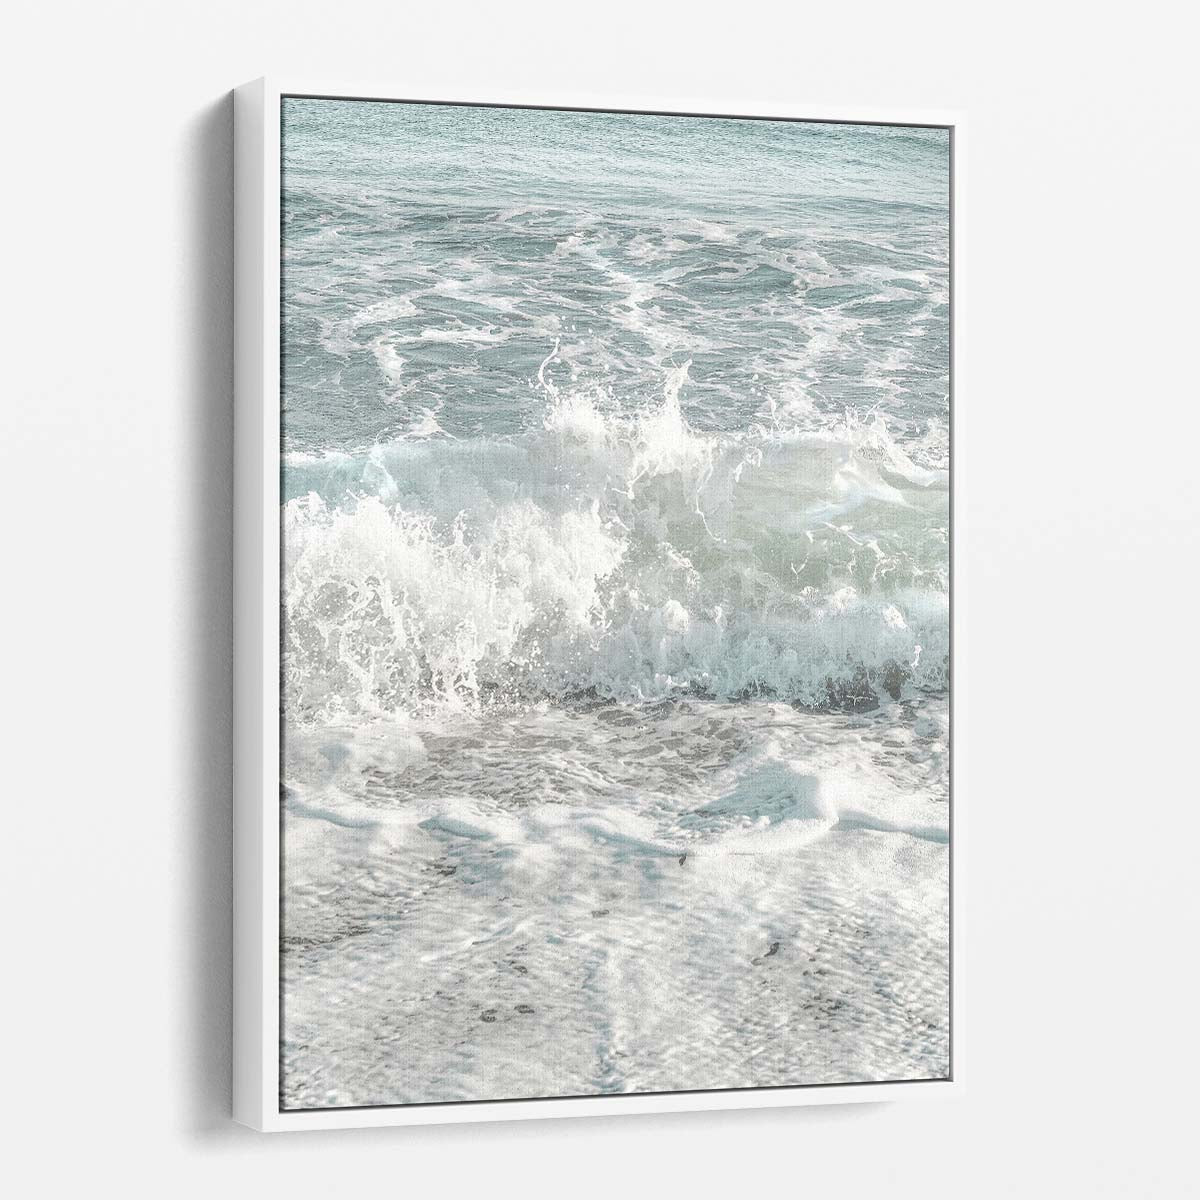 Coastal Abstract Seascape Faded Water Wave Beach Photography Art by Luxuriance Designs, made in USA